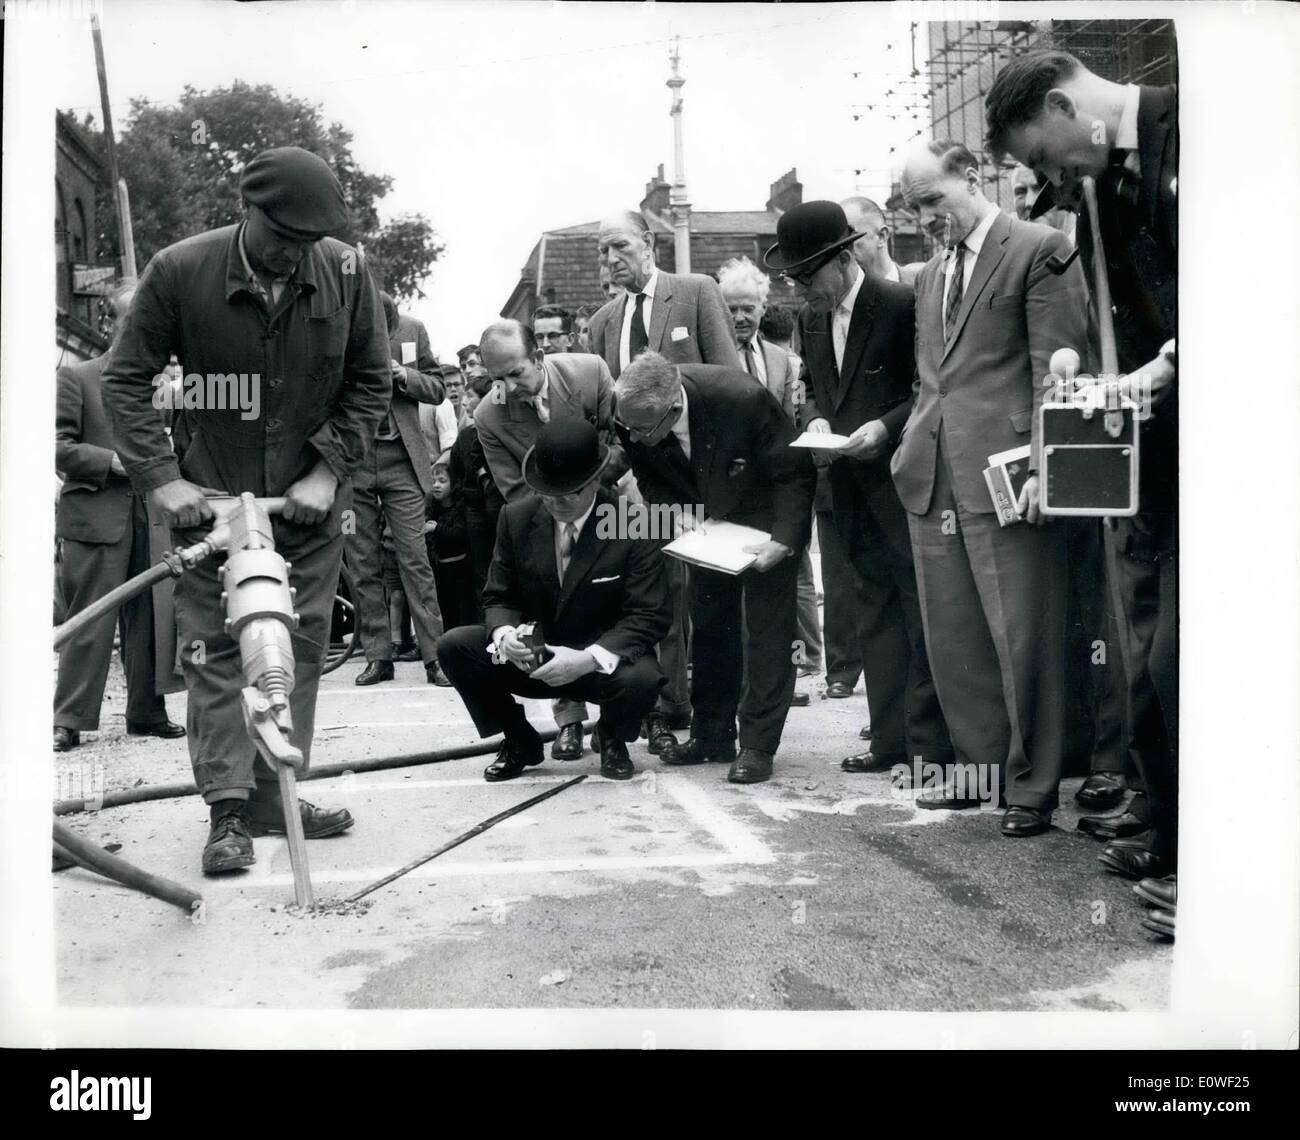 Aug. 08, 1962 - What Price Peace: Diamond Tipped Road Drills For London?: Bowler-hutted officials bend down on their haunches as they operate intricate guages to record the amount of noise produced by various types of road drills, in Shoreditoh, London, today. This is the Noise Abatement Society at work. A group of dedicated lovers of peace who are willing to pay any price for a bit of quiet in the capital city. No wonder the psychiatric couches are laiden with sufferes of nervous tension. Photo shows Mr.John Connell working a guage. The drill is pneumatic Stock Photo